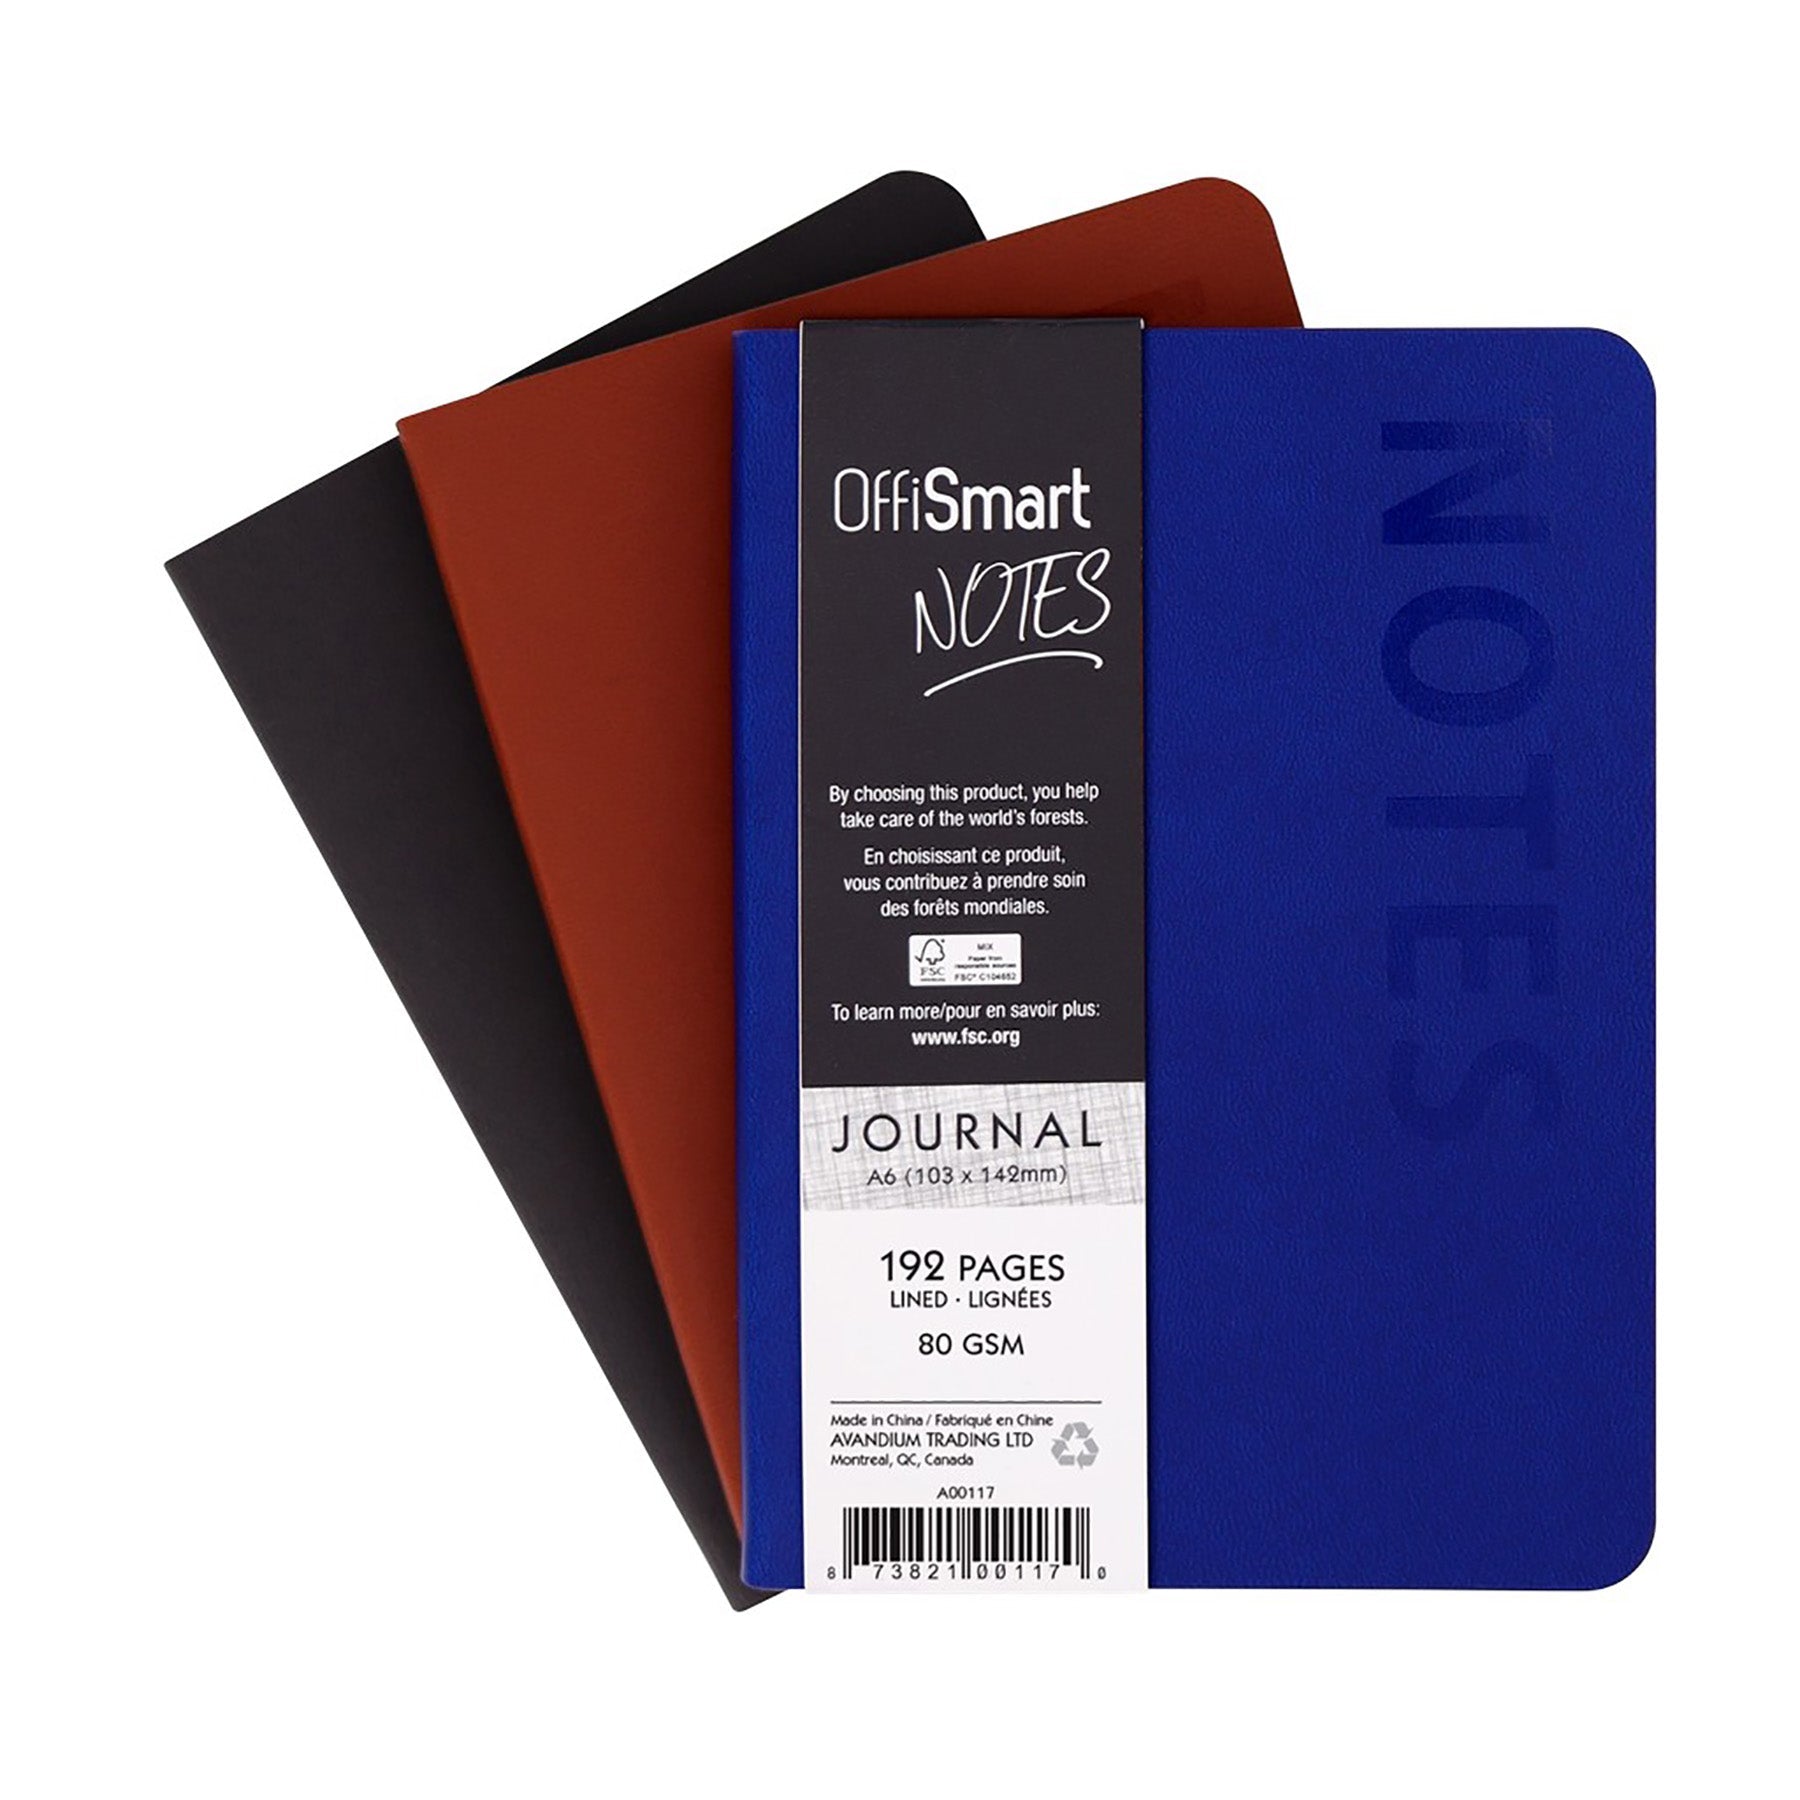 Offismart Soft-Touch Leatherette Notebook A6 192 Lined Pages 4x6in